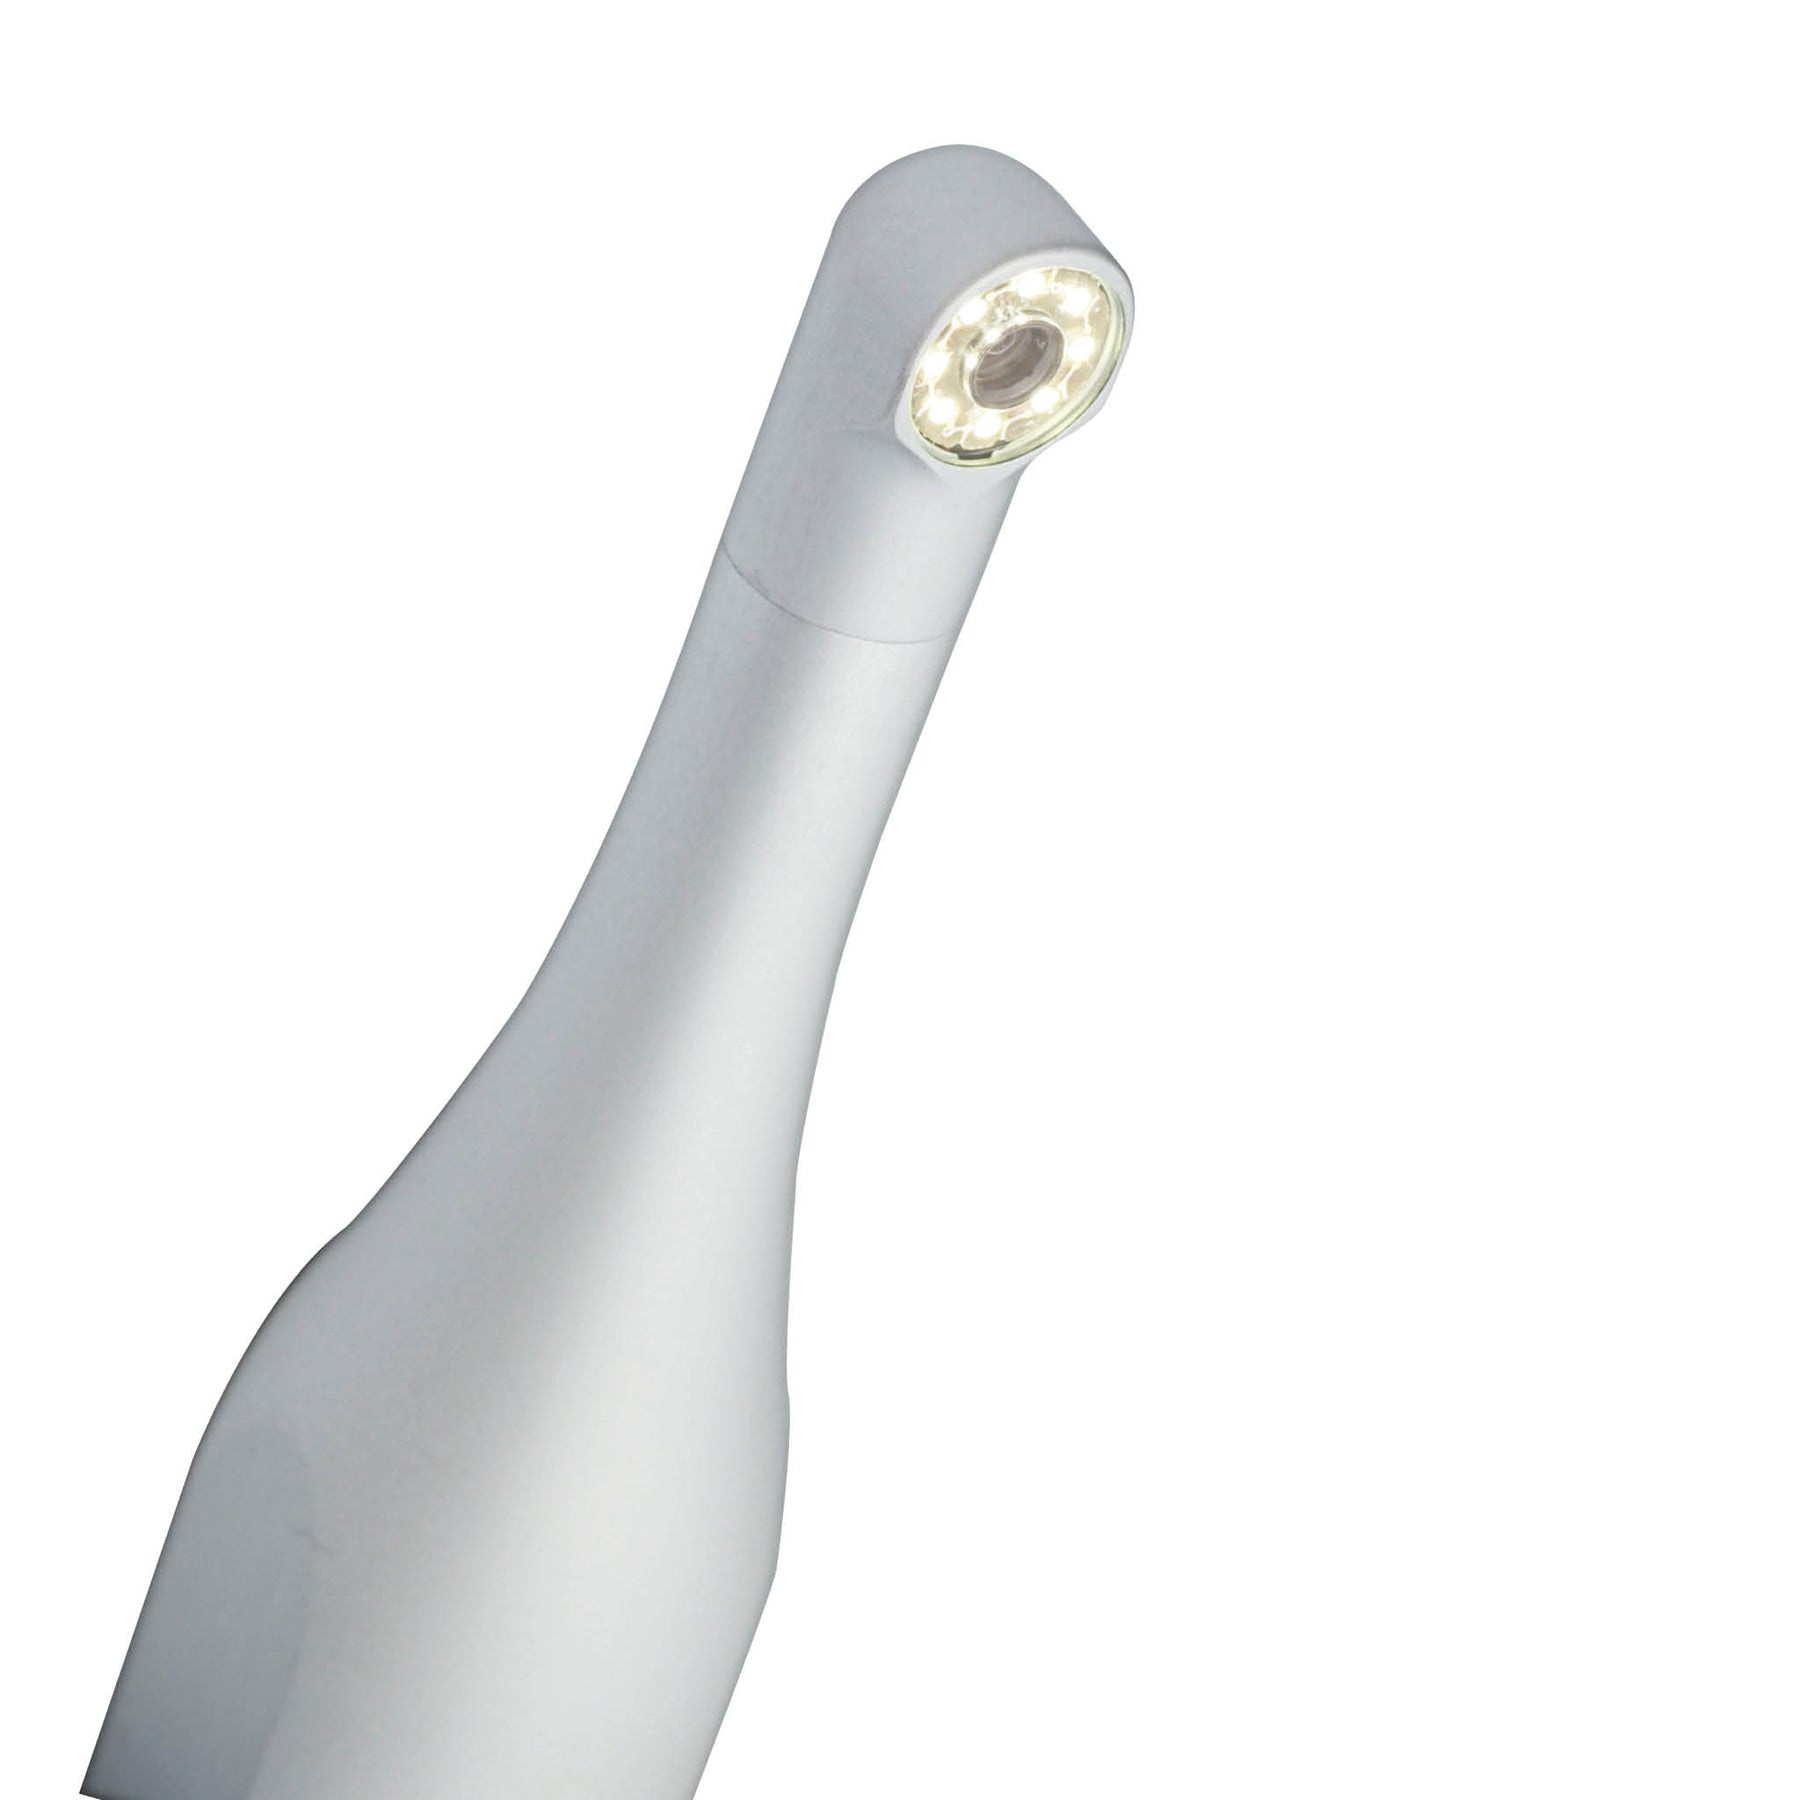 The IC Lercher M-Cam HD delivers high-precision HD images for state-of-the-art endoscopy